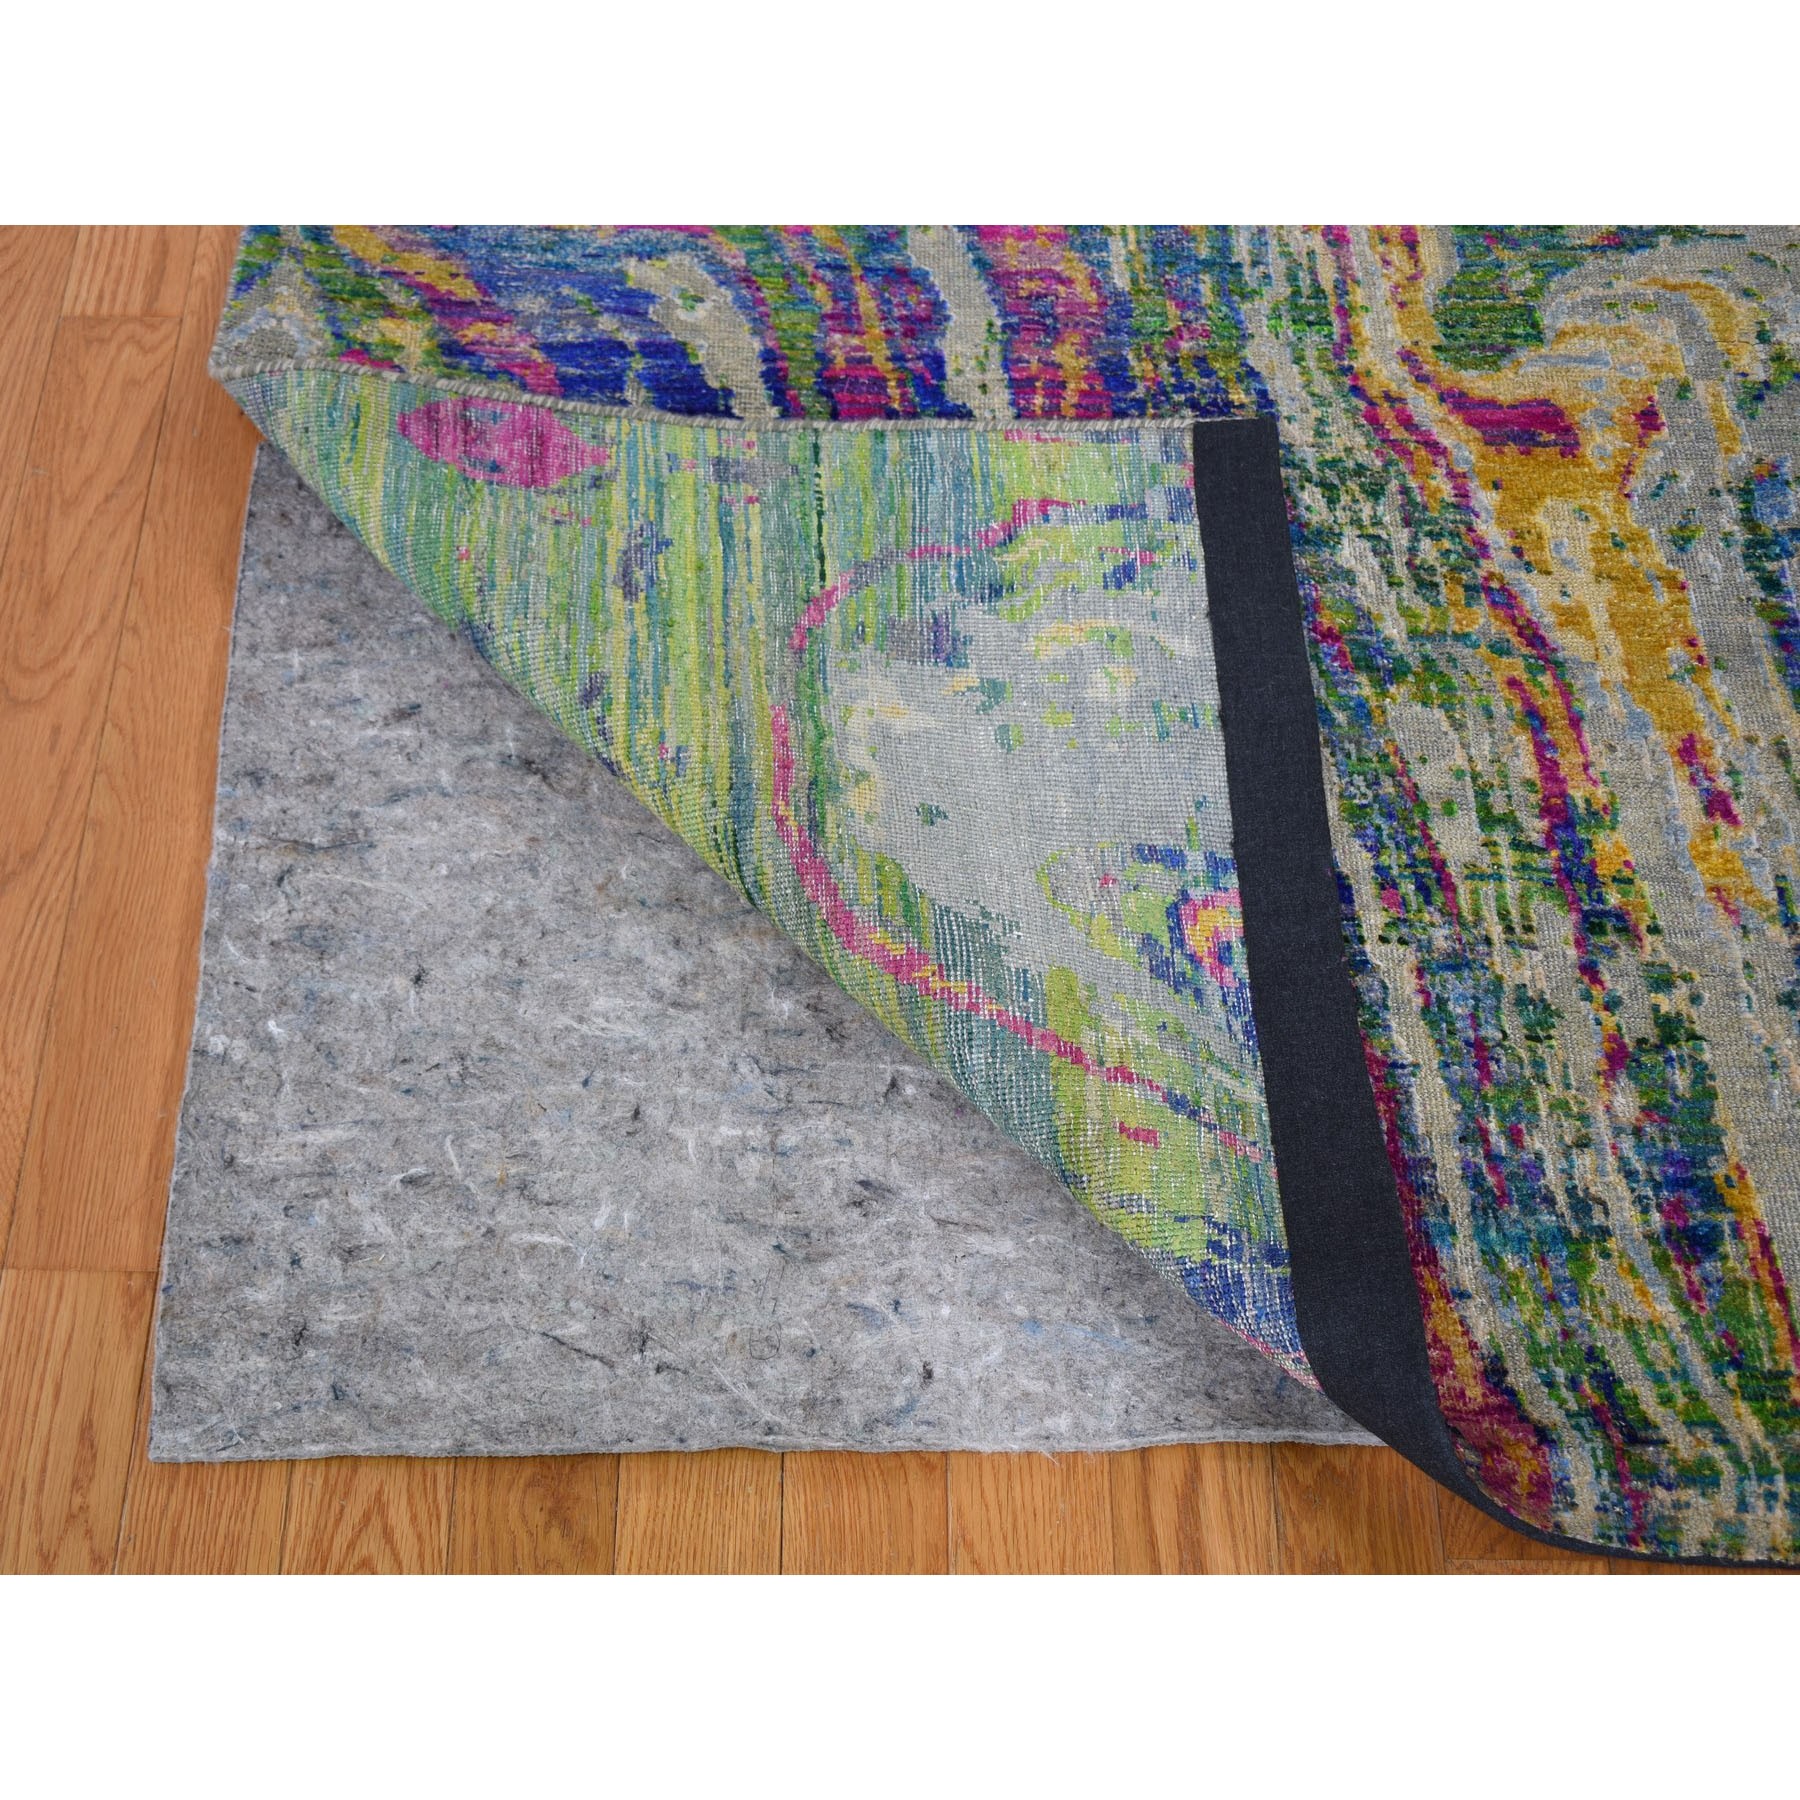 8'7"x11'6" THE LAVA, Colorful Sari Silk With Textured Wool Hand Woven Oriental Rug 